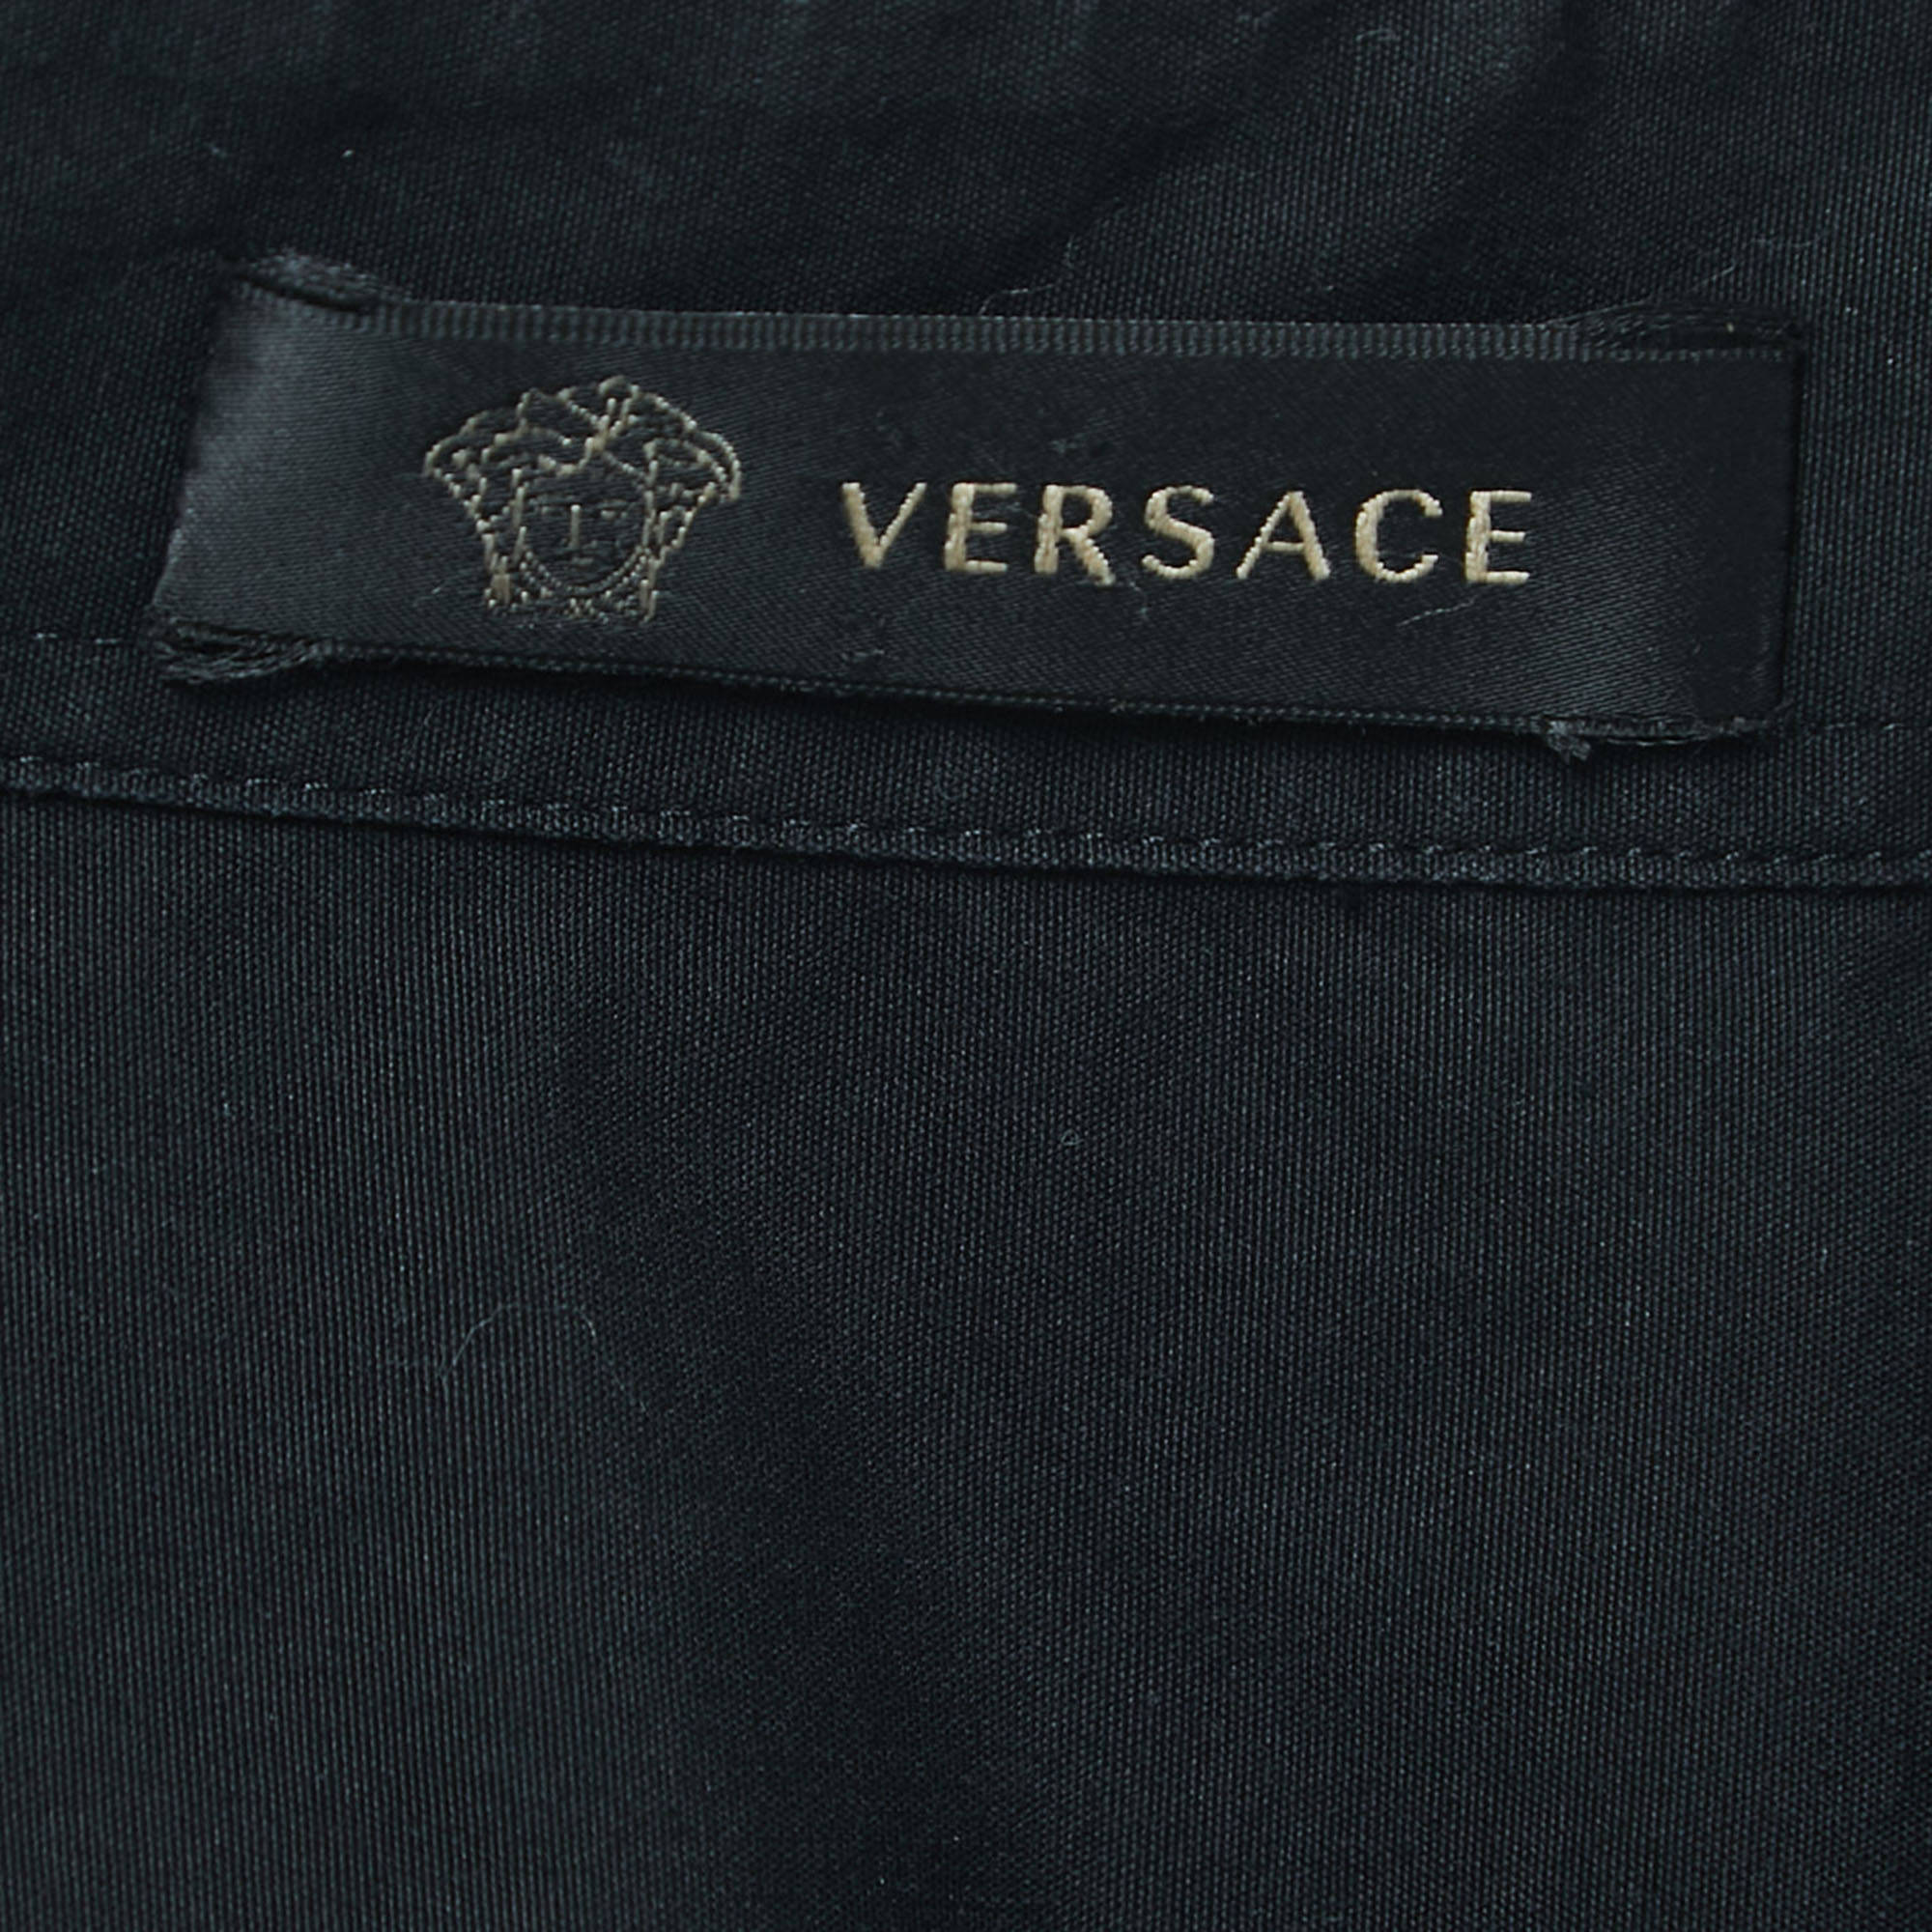 Versace Black Embroidered Cotton Button Front Double Cuff Shirt XL